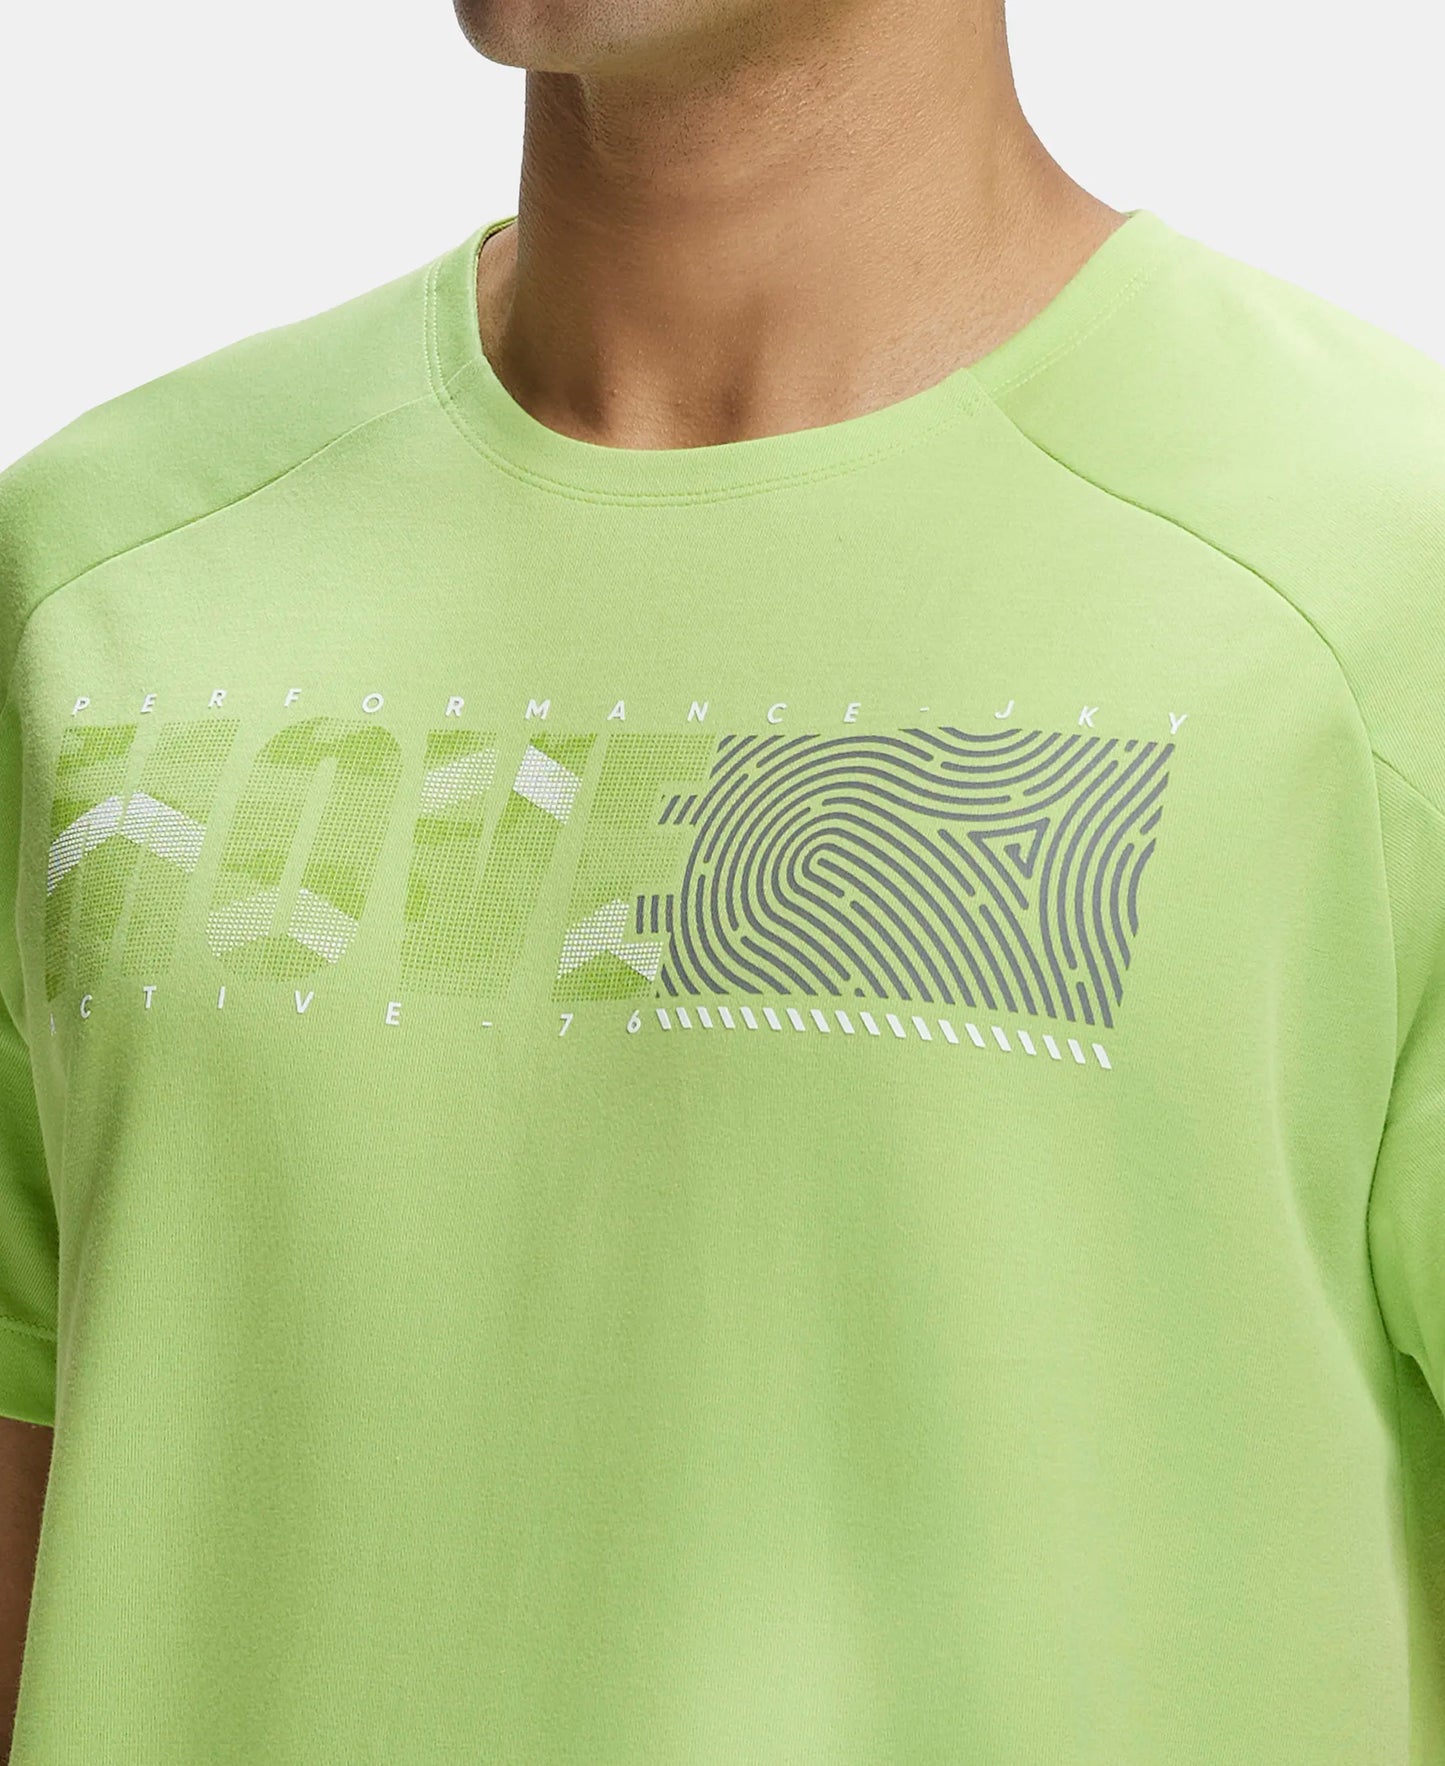 Super Combed Cotton Blend Graphic Printed Round Neck Half Sleeve T-Shirt with Stay Fresh Treatment - Green Glow-7